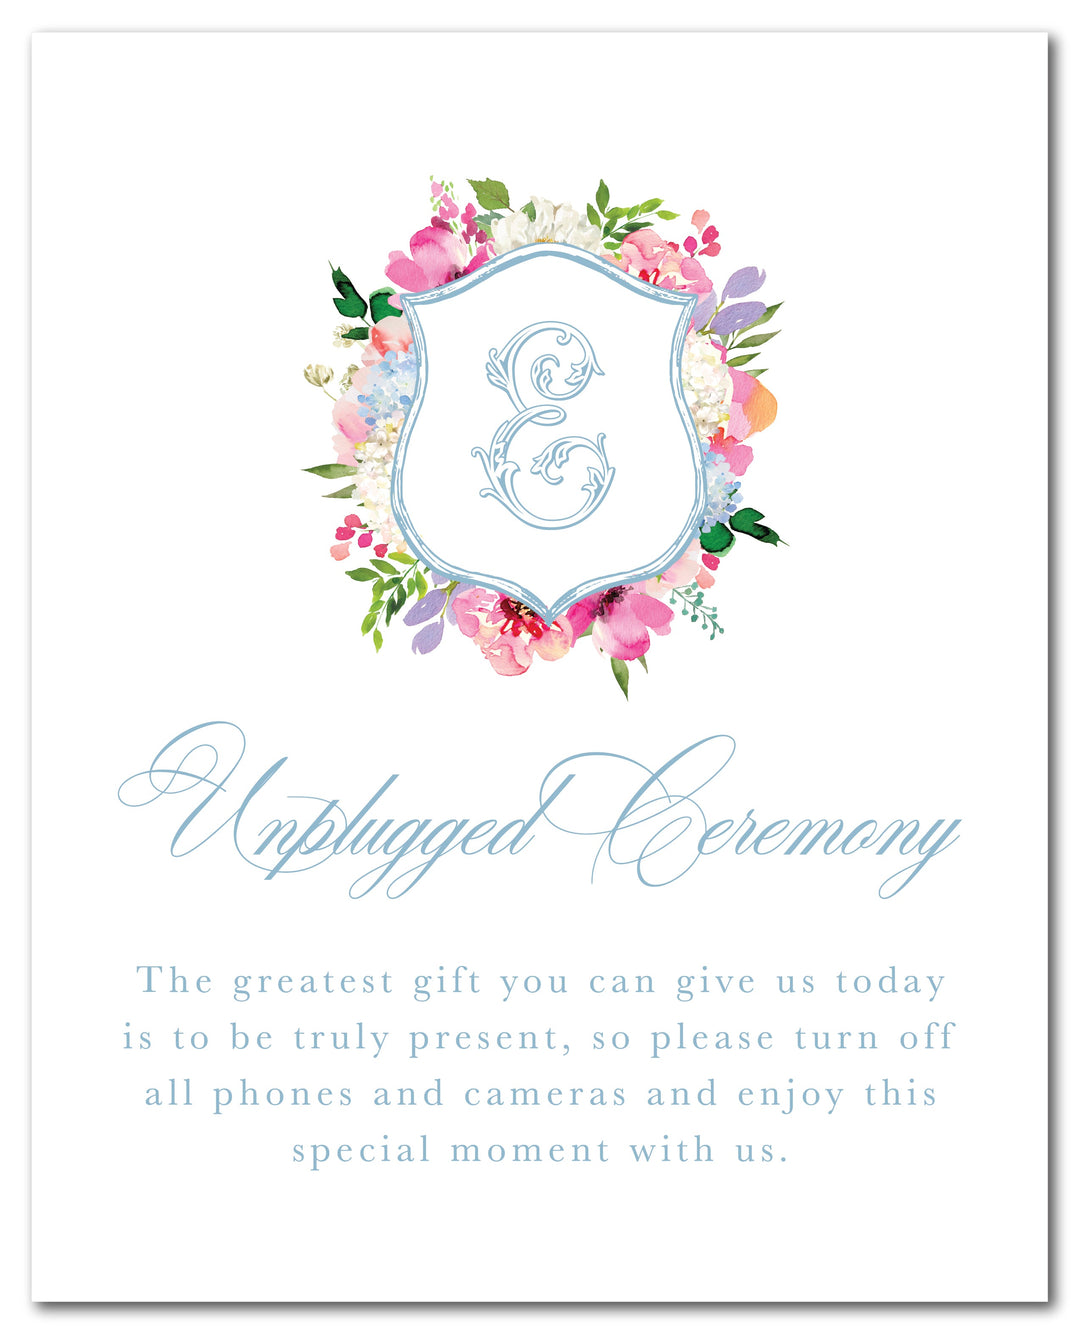 The Emma Unplugged Ceremony Sign